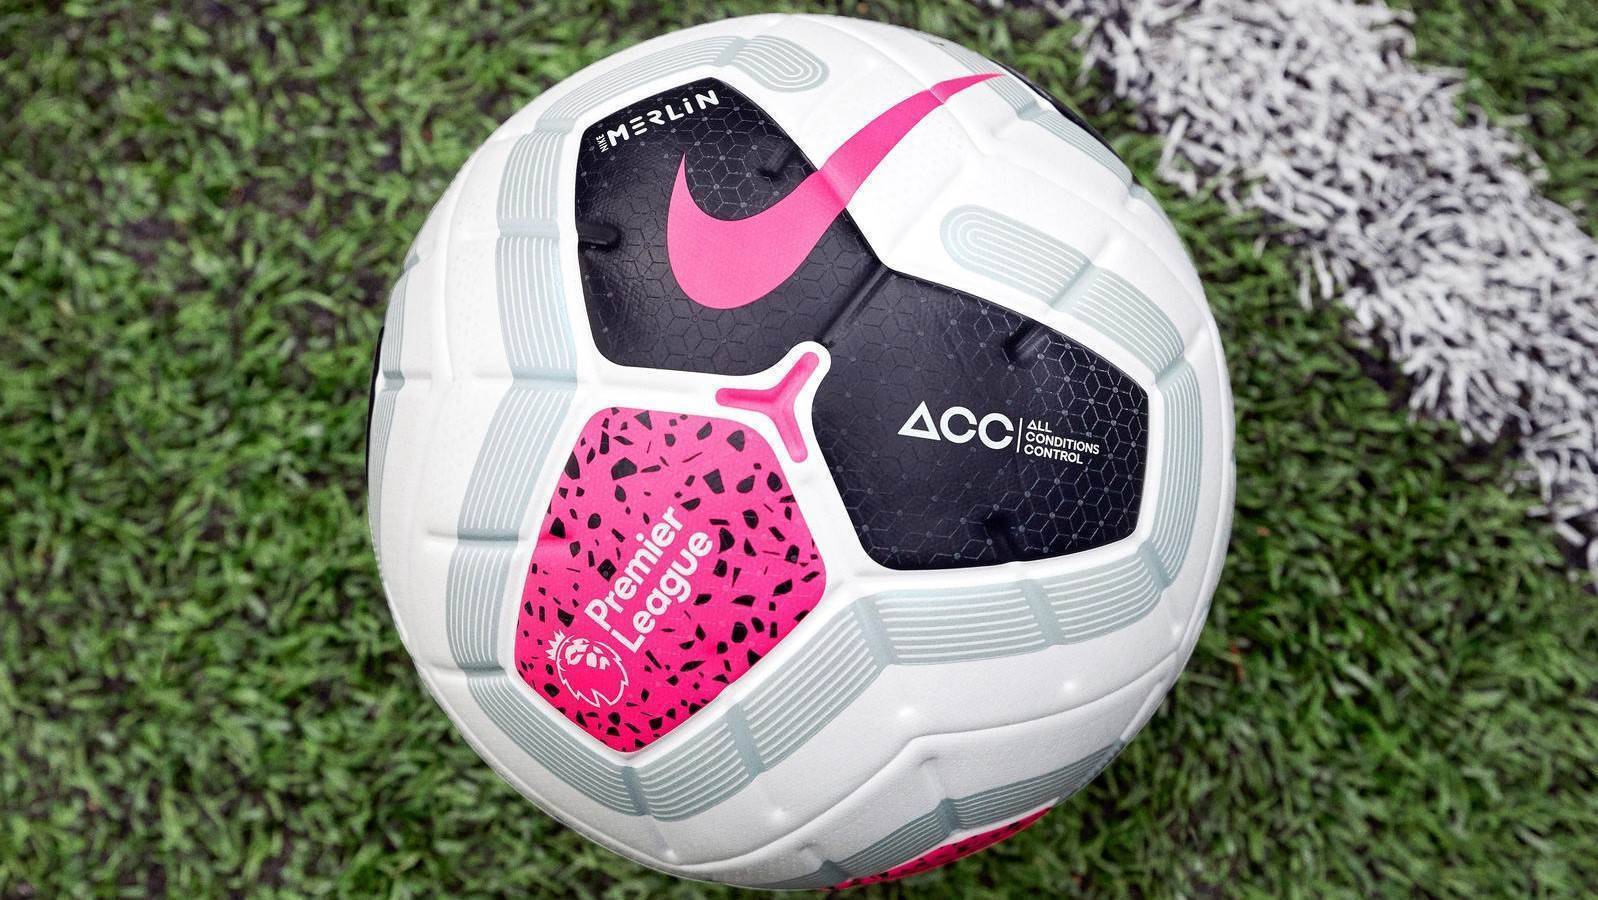 Nike Merlin unveiled official match ball for the 2019/20 Premier League season - FTBL | The home of football in Australia